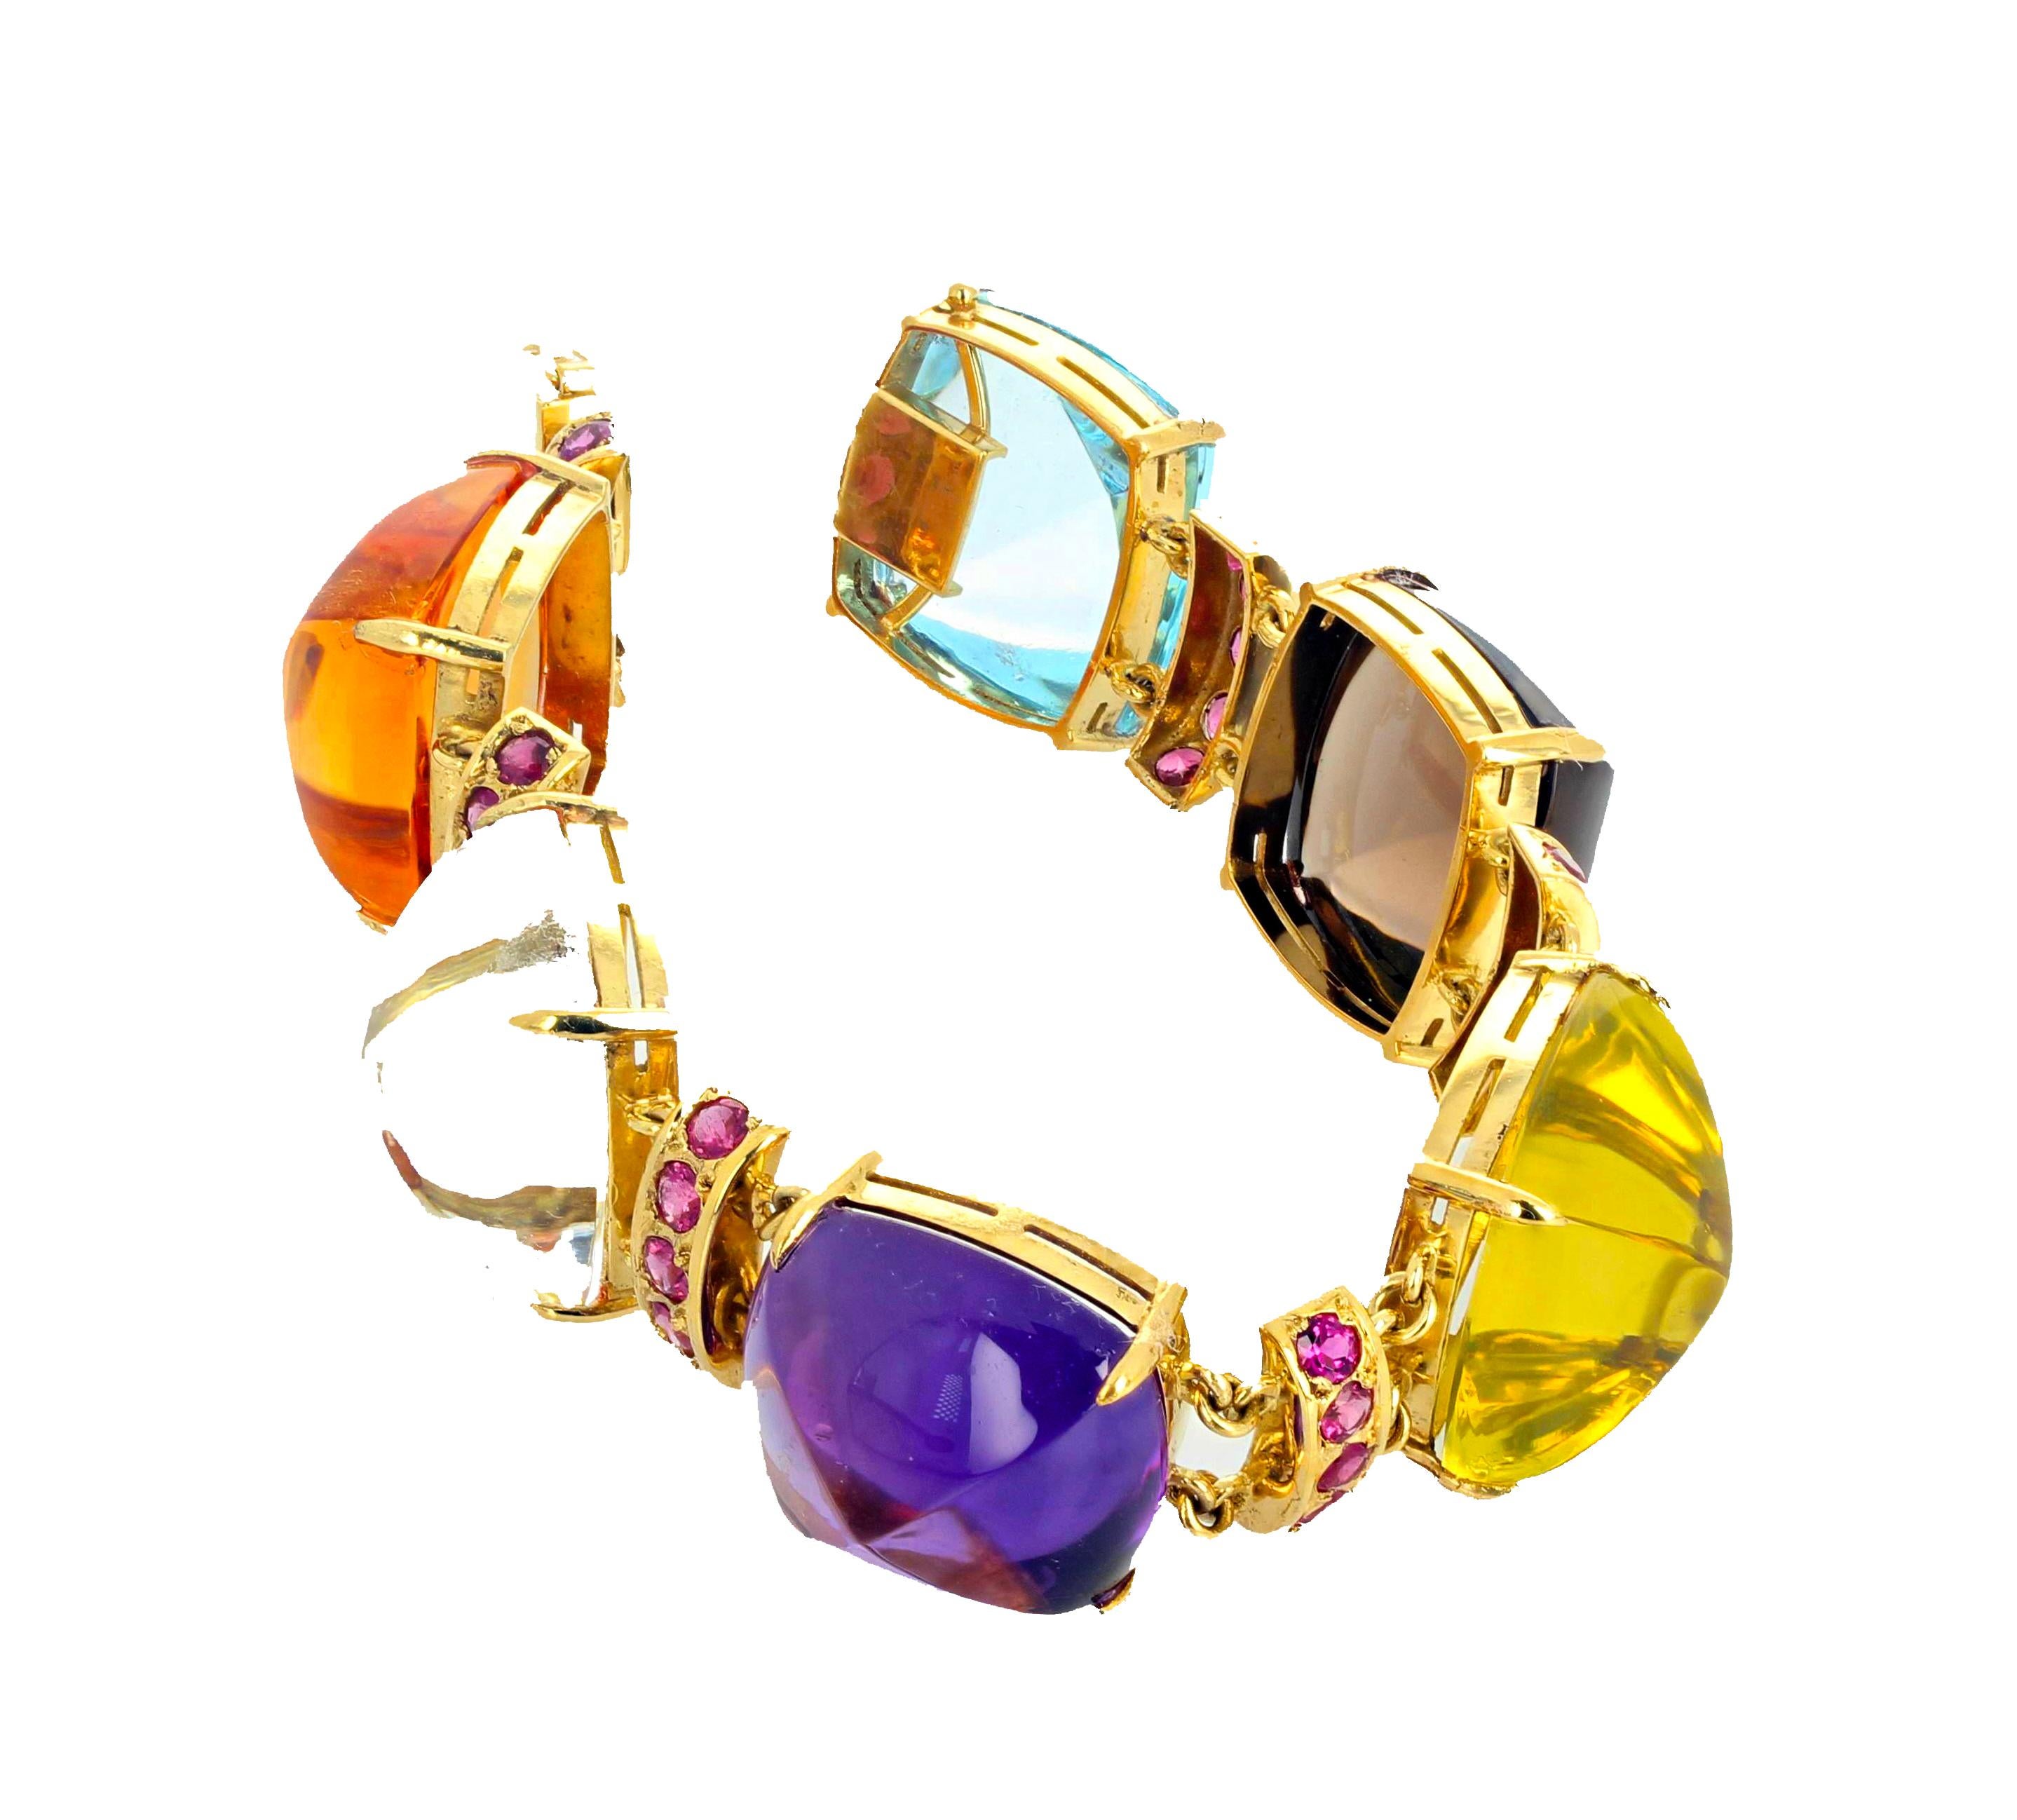 This eye catching 18Kt yellow gold bracelet is 7.25 inches long.  Each of the large gemstones - Citrine, Silver Quartz, Amethyst, Lemon Quartz, Smoky Quartz and Blue Topaz -  is approximately 20 mm x 19.5 mm and are enhanced by the brilliant